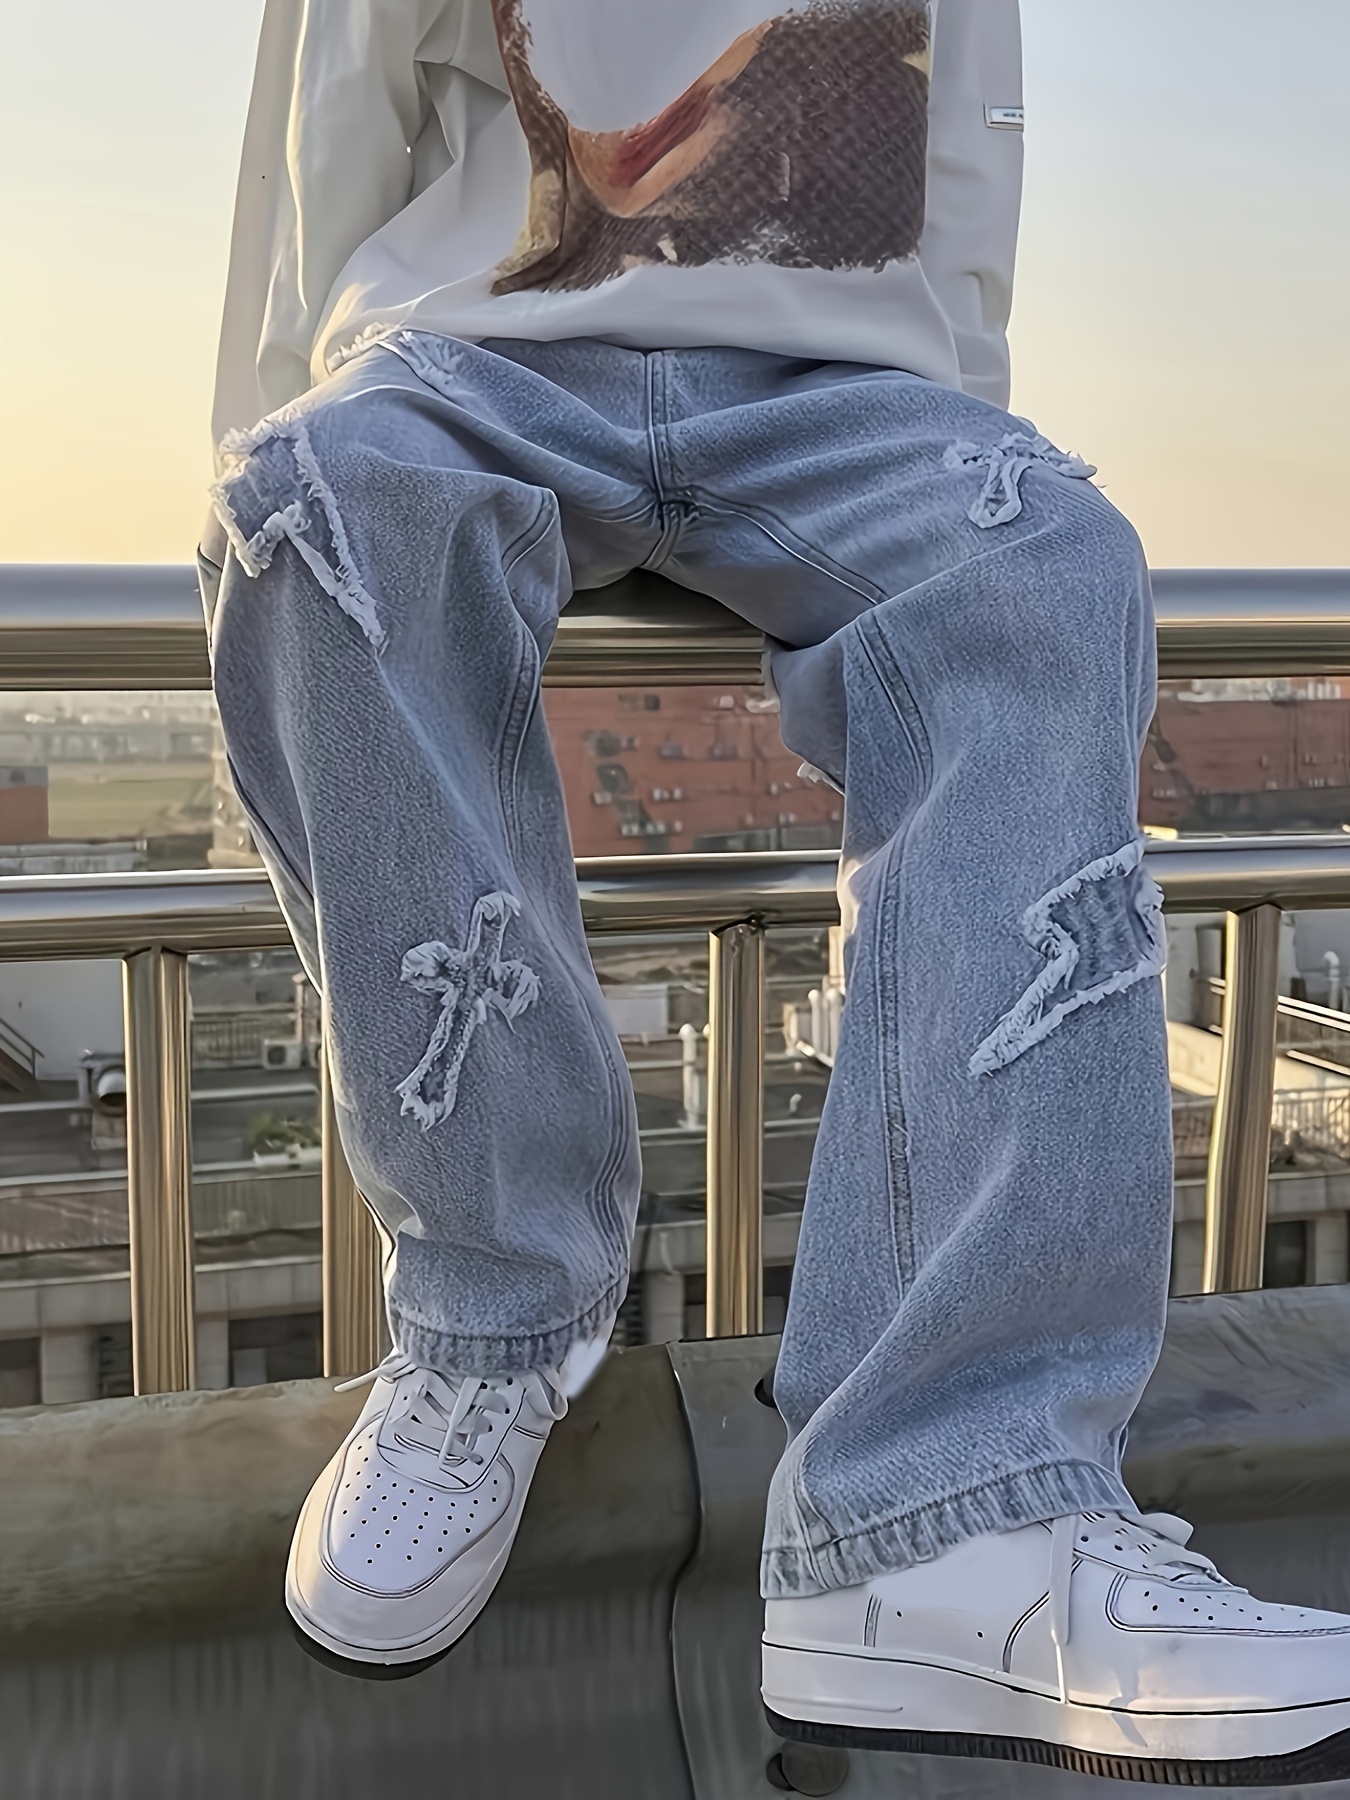 Ripped Jeans  Men's & Women's Jeans, Clothes & Accessories